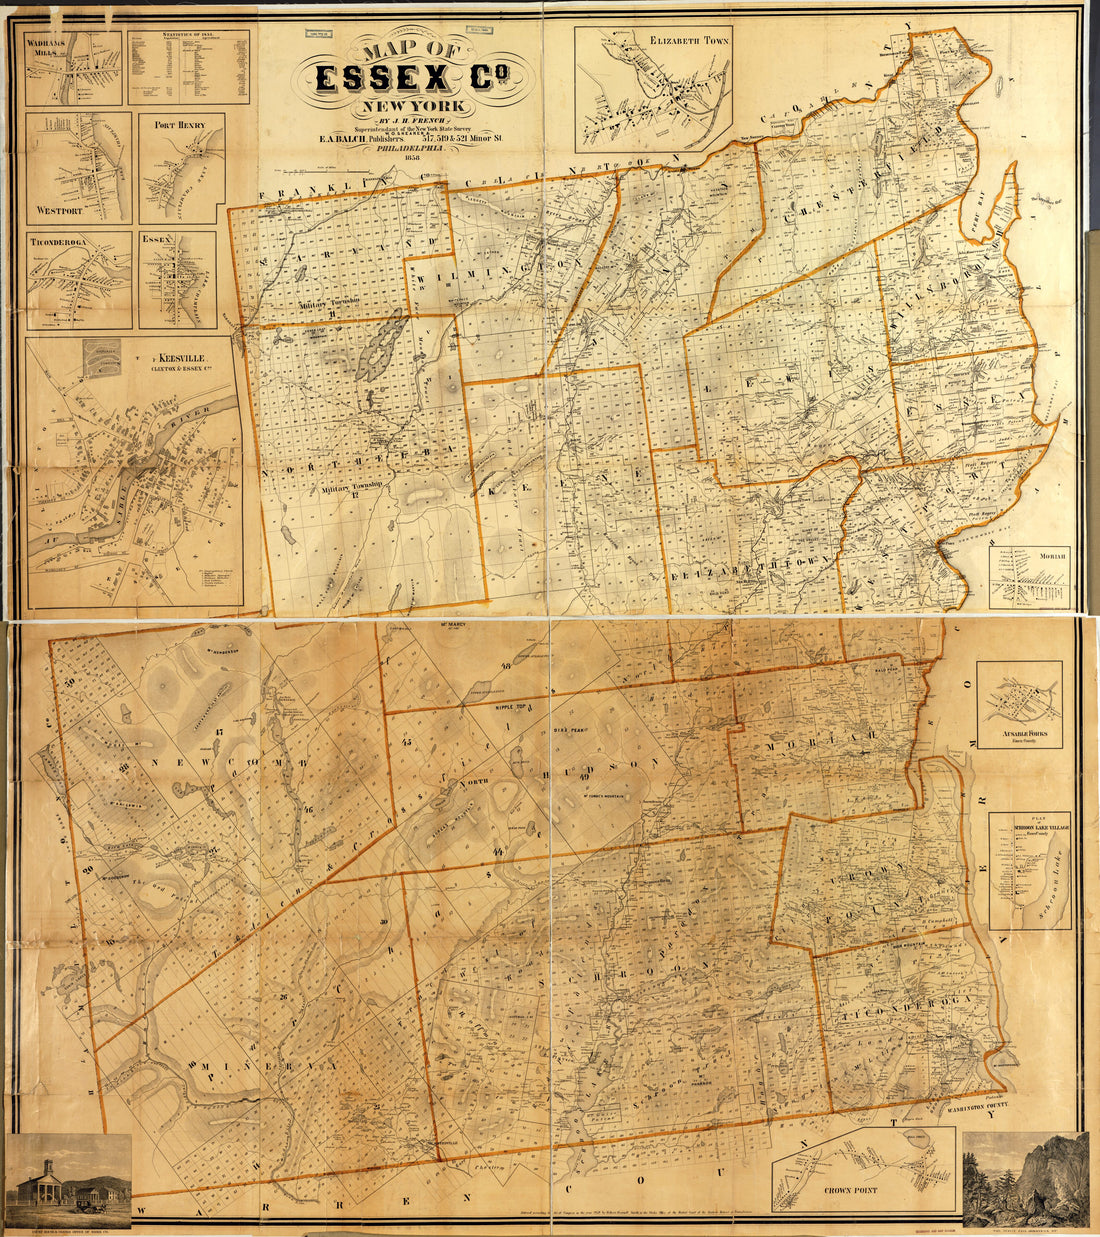 This old map of Map of Essex Co., New York from 1858 was created by J. H. (John Homer) French in 1858